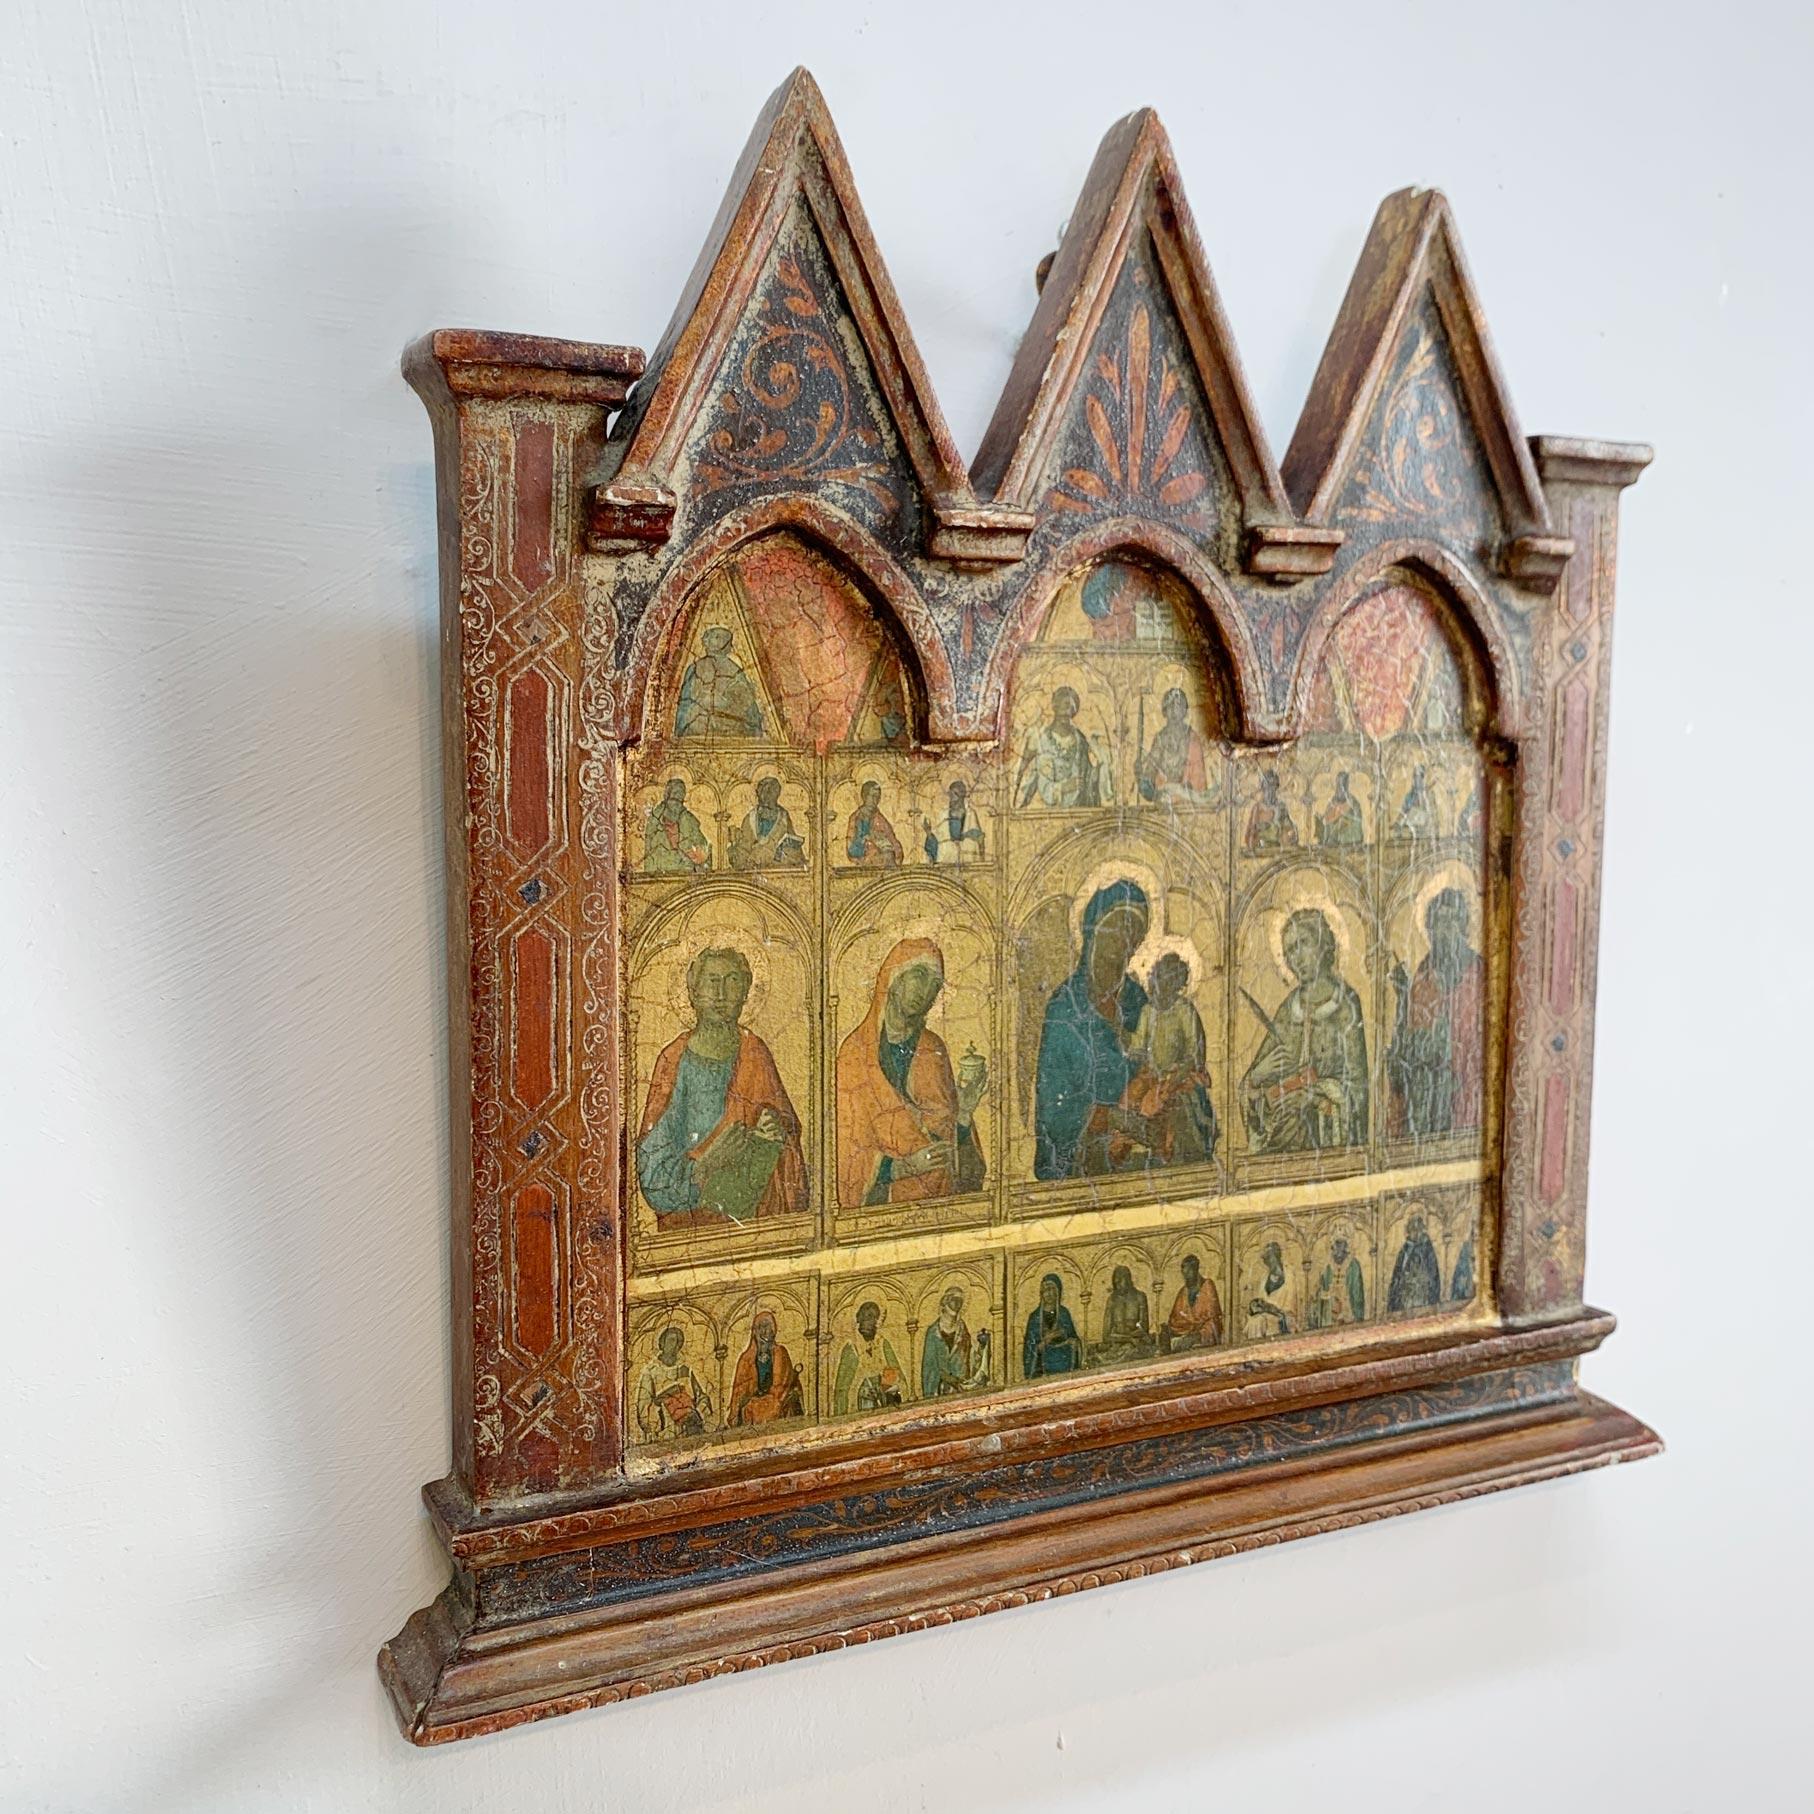 Late 19th century smaller scale Icon painting on wood, the arched, spired frame with applied gesso and gilt. The beautifully painted image is of The Virgin Mary, holding the infant Jesus, surrounded by Saints.

We believe this is a Greek Orthodox